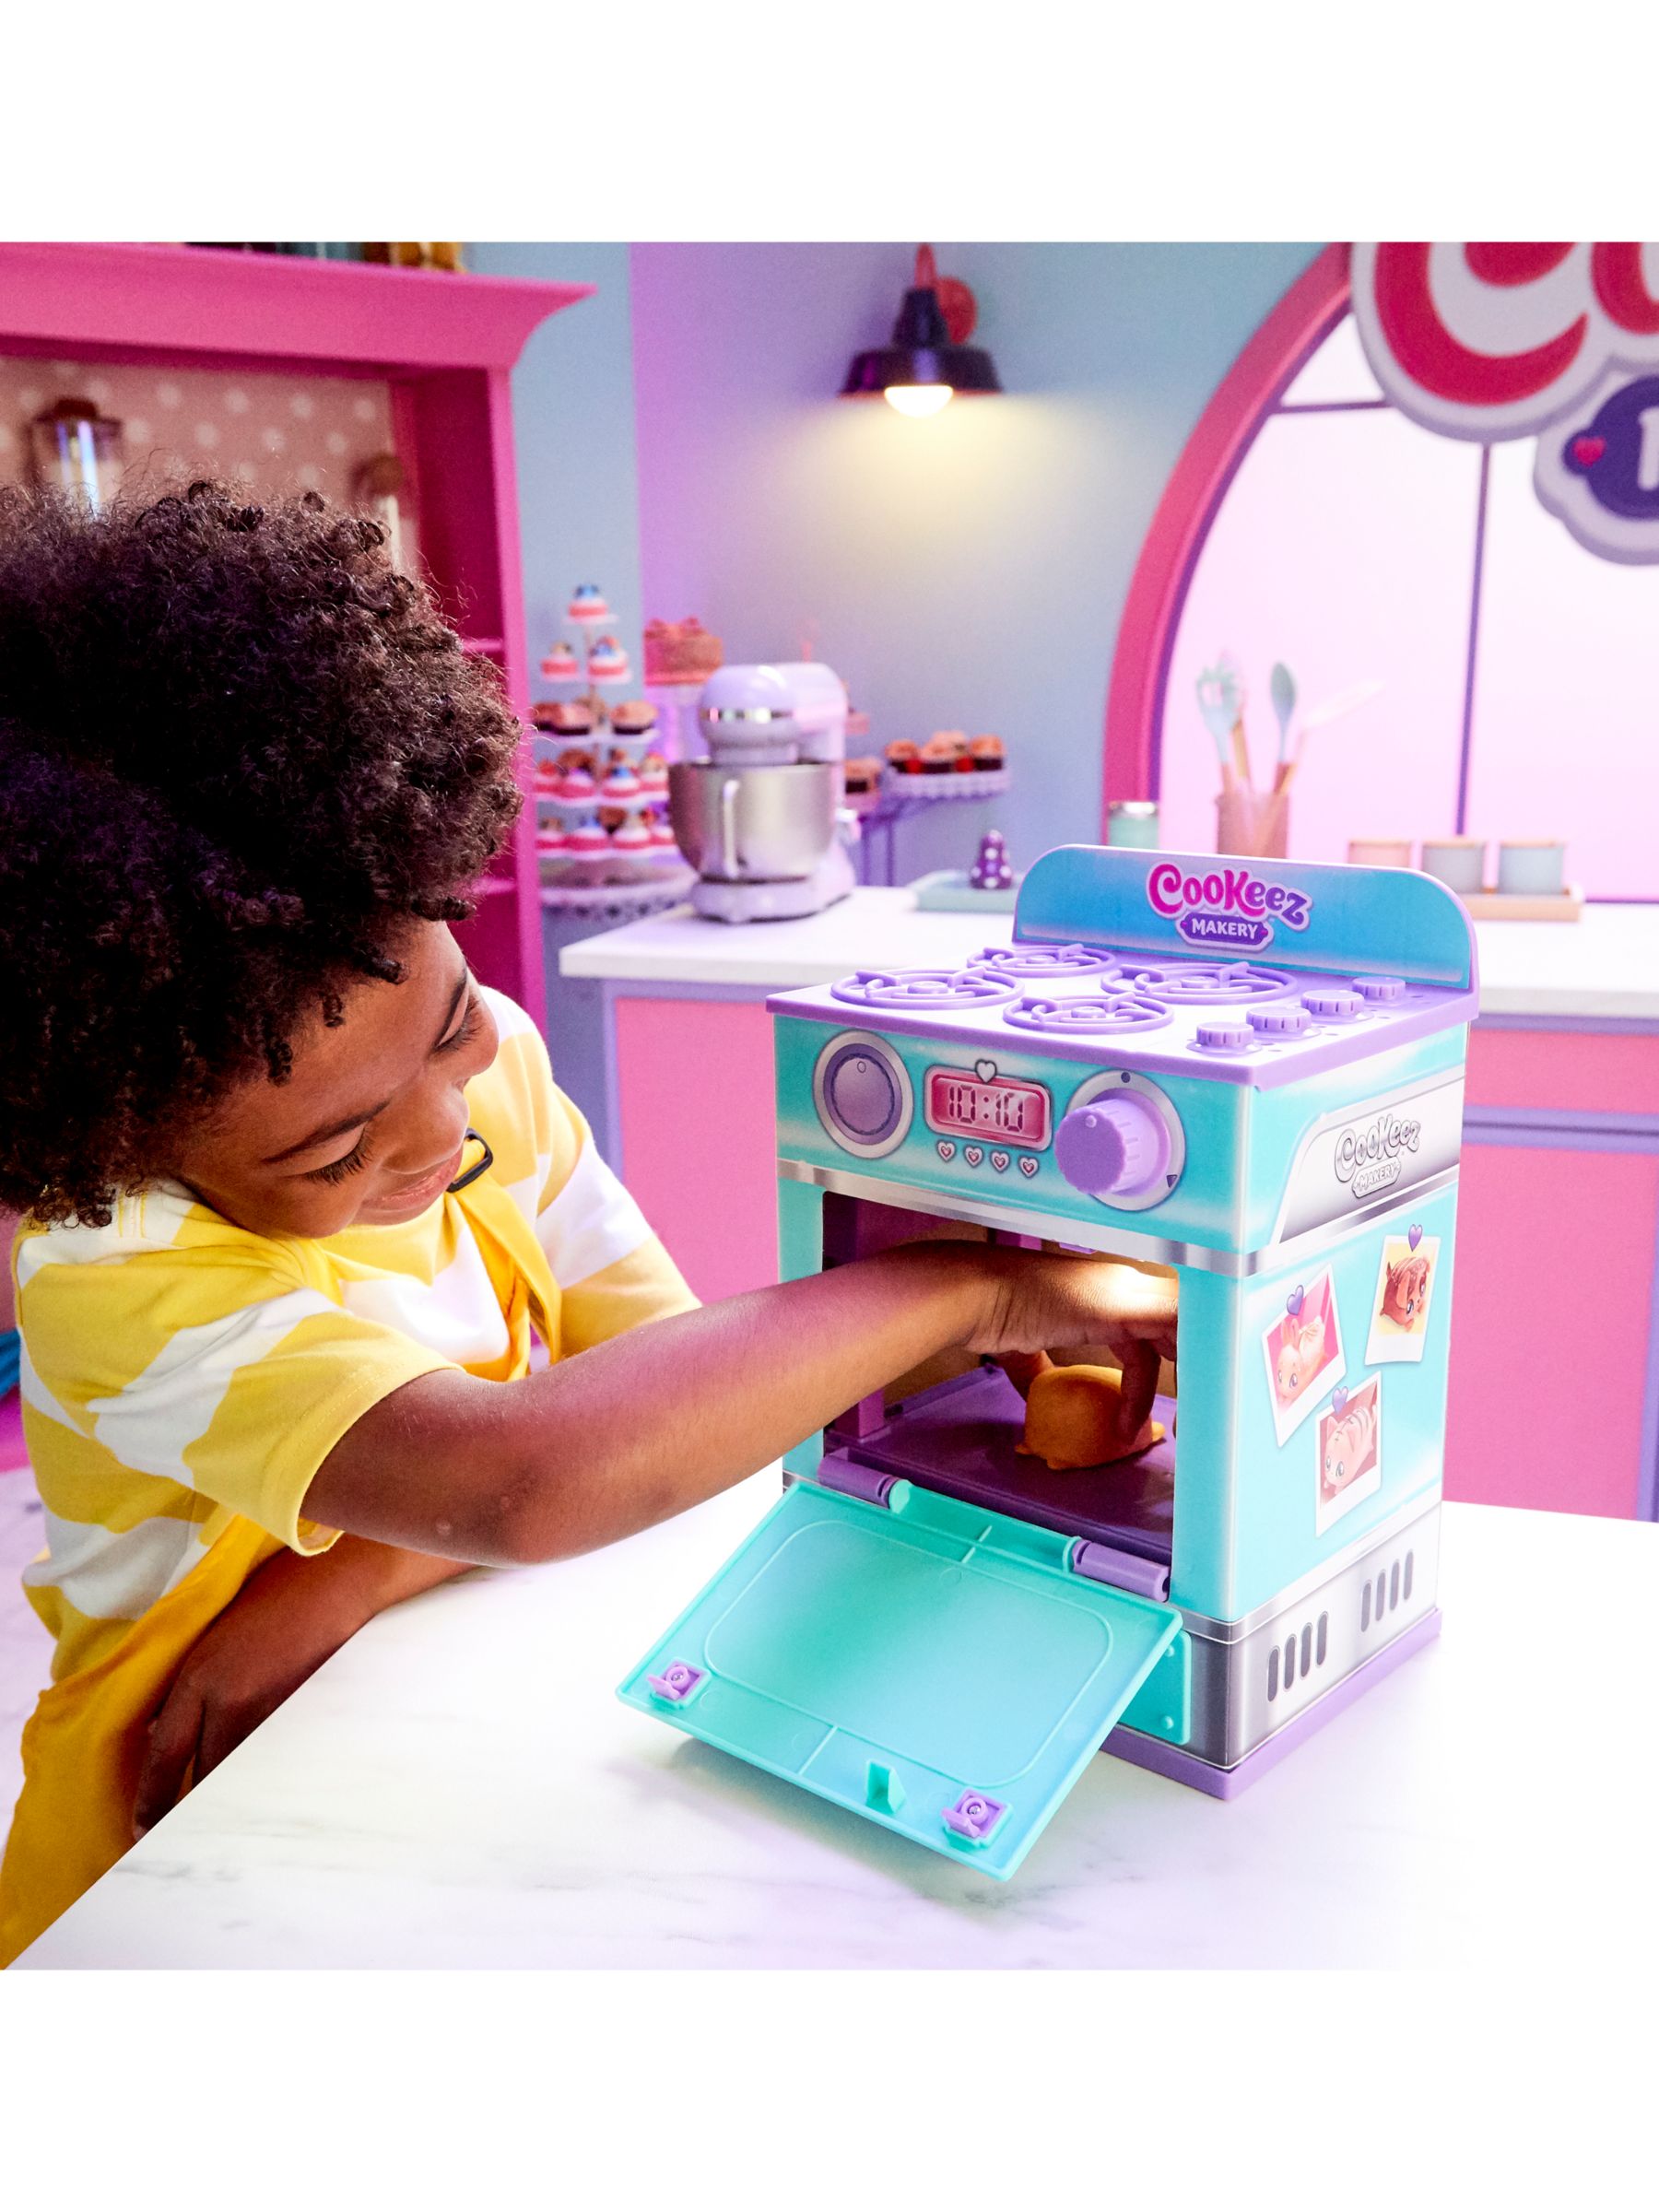 Meet the Cookeez Makery Oven Playset! Cook up your own surprise